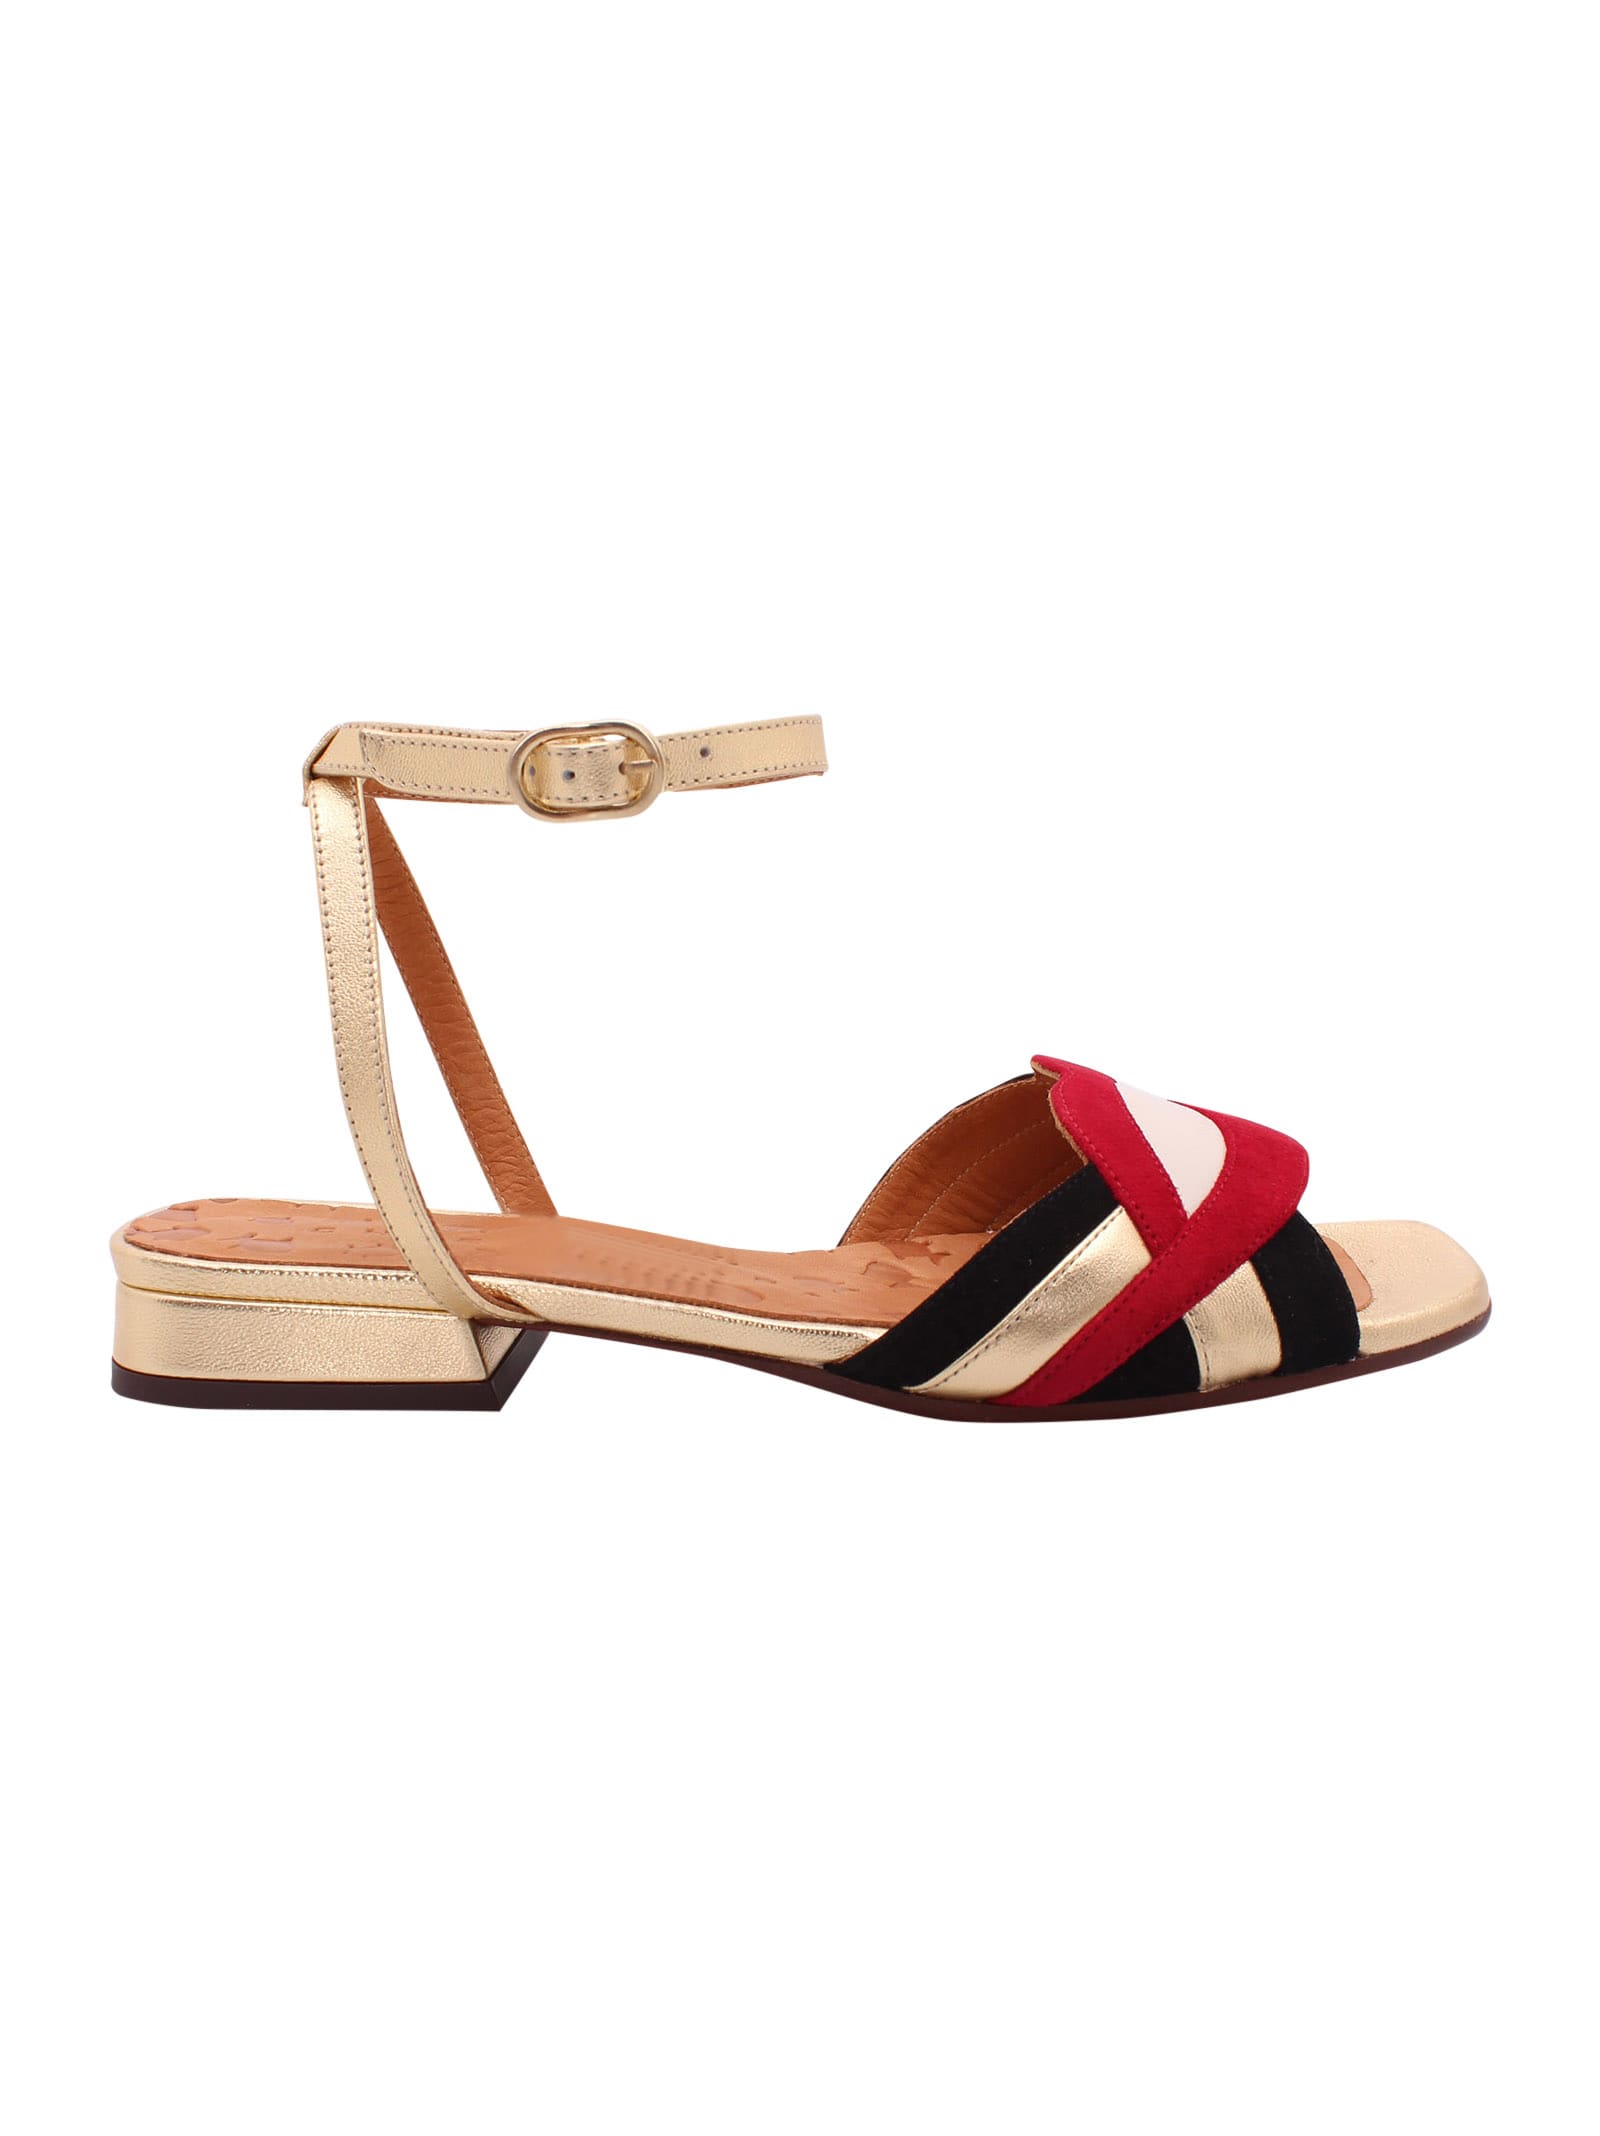 CHIE MIHARA TIMAI LEATHER SANDALS,11261108